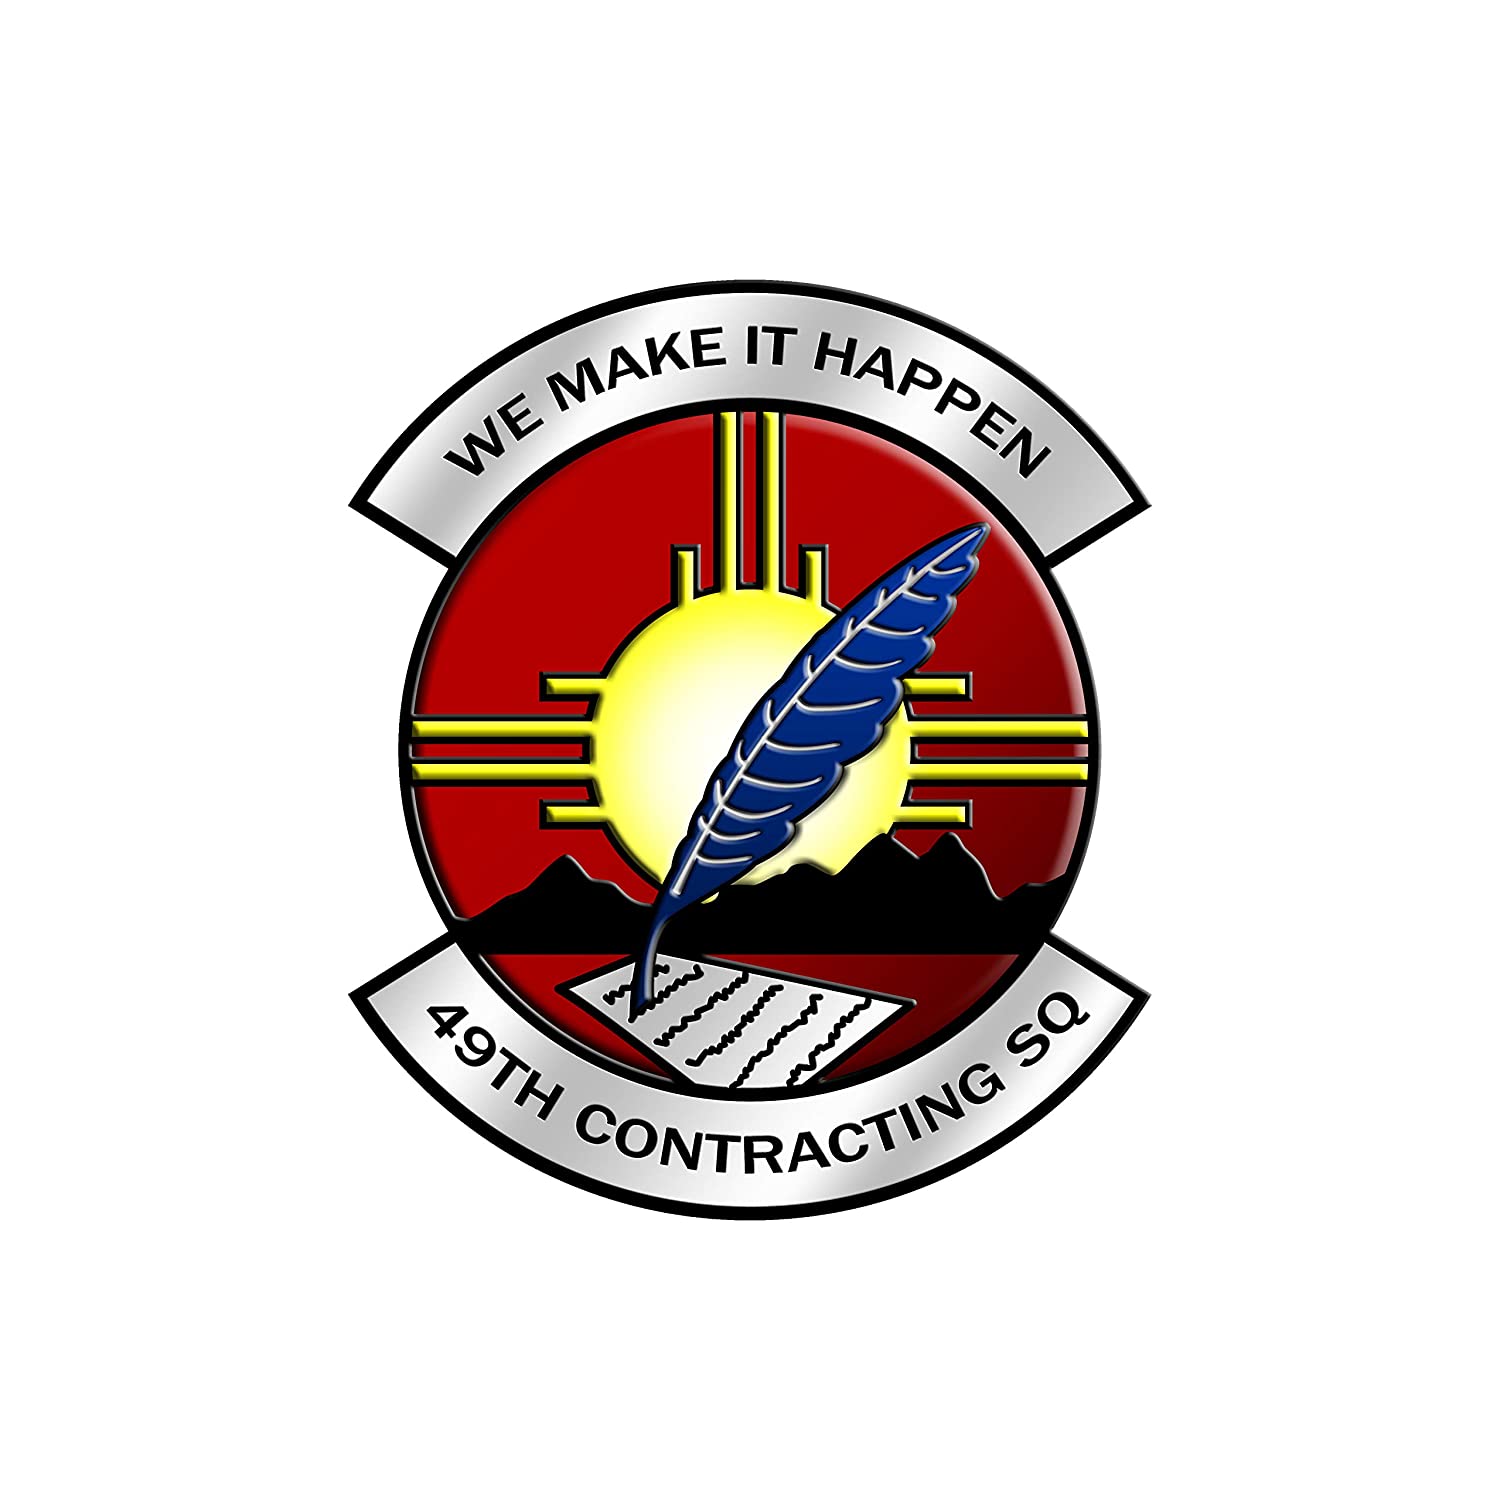 49th Contracting Squadron - Patch Vinyl Decal - Available in Multiple Sizes